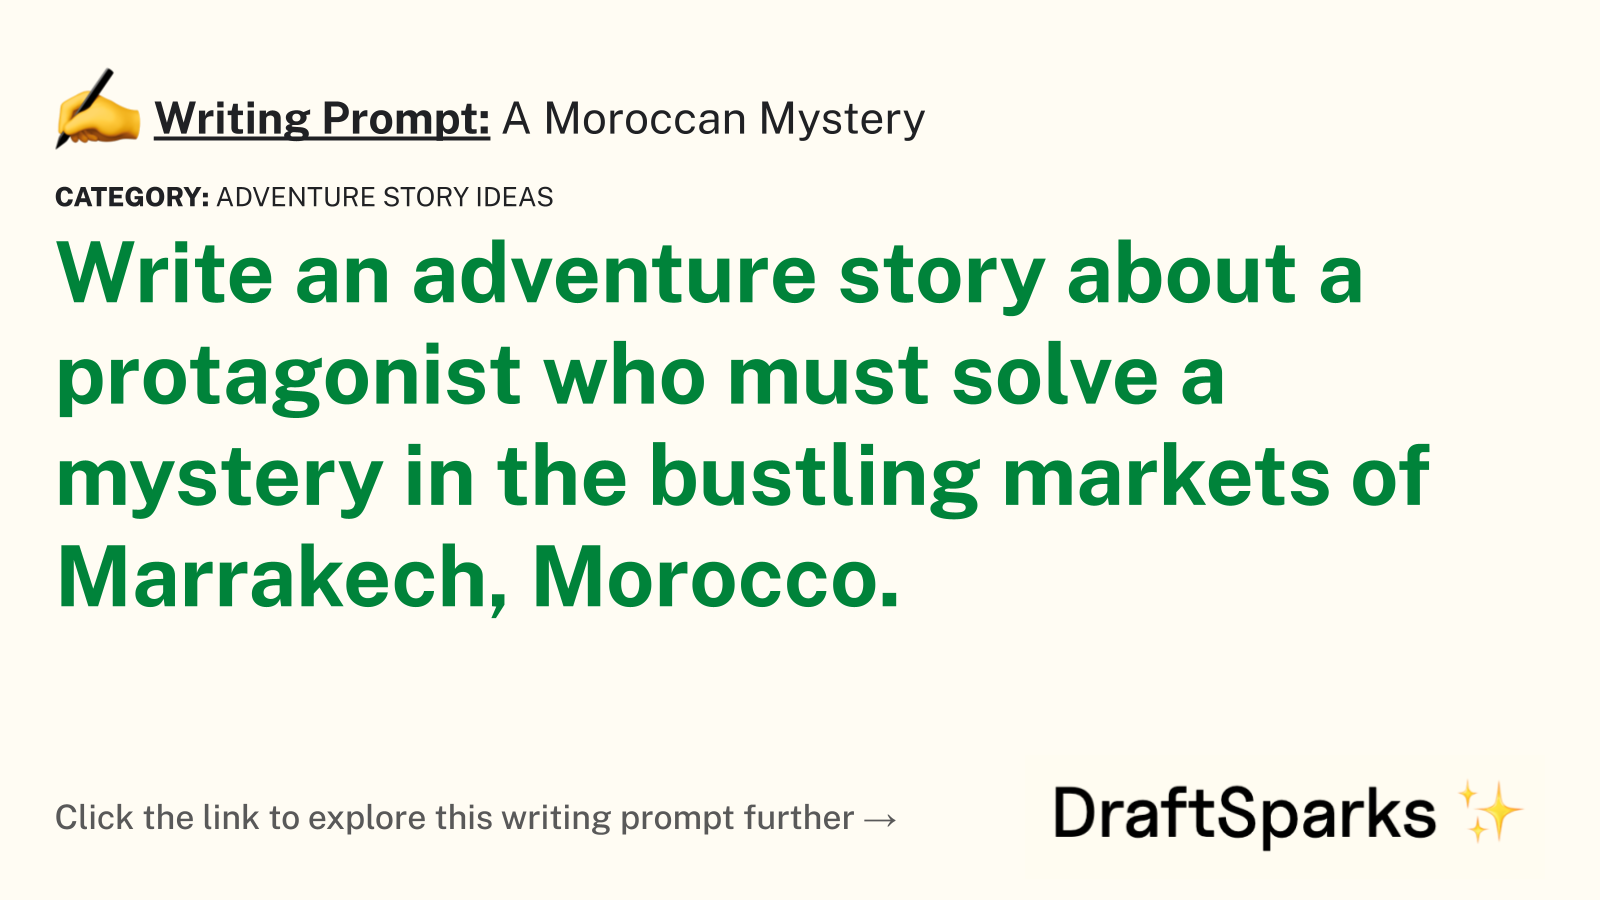 A Moroccan Mystery